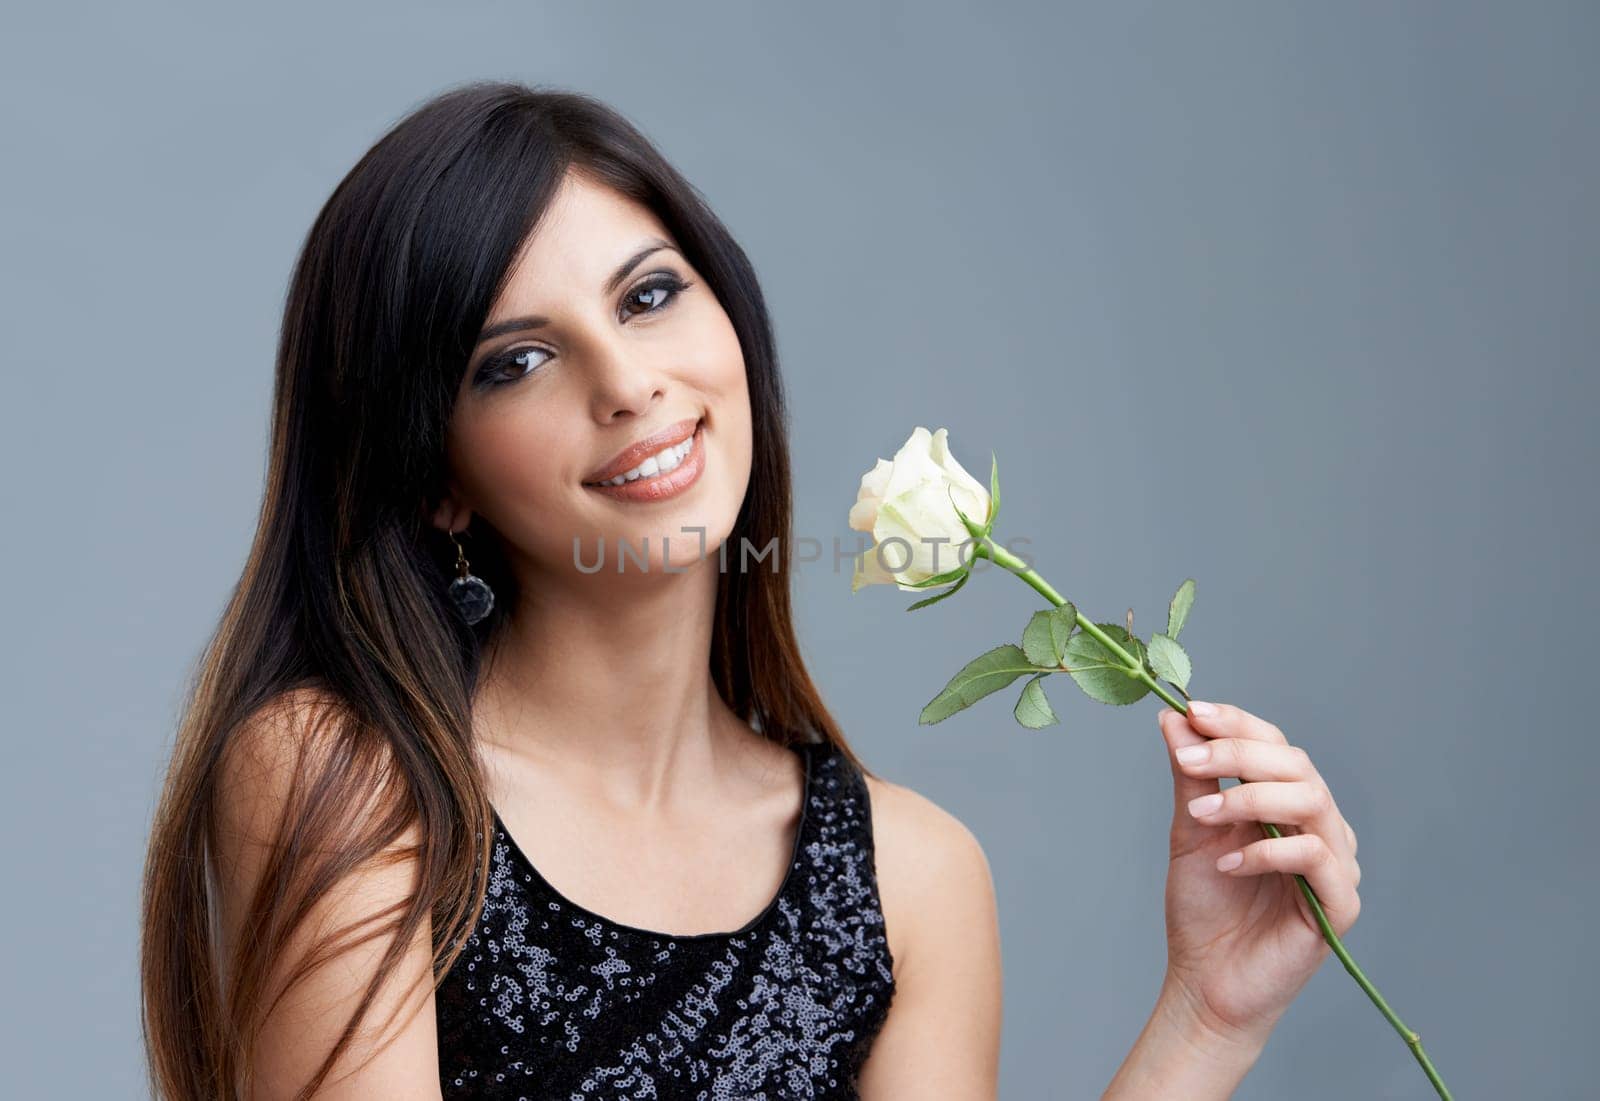 Fashion, flower and portrait of woman on gray background for beauty, cosmetics and confidence. Happy, smile and face of person with rose, floral and bloom for spring, romance and present in studio.